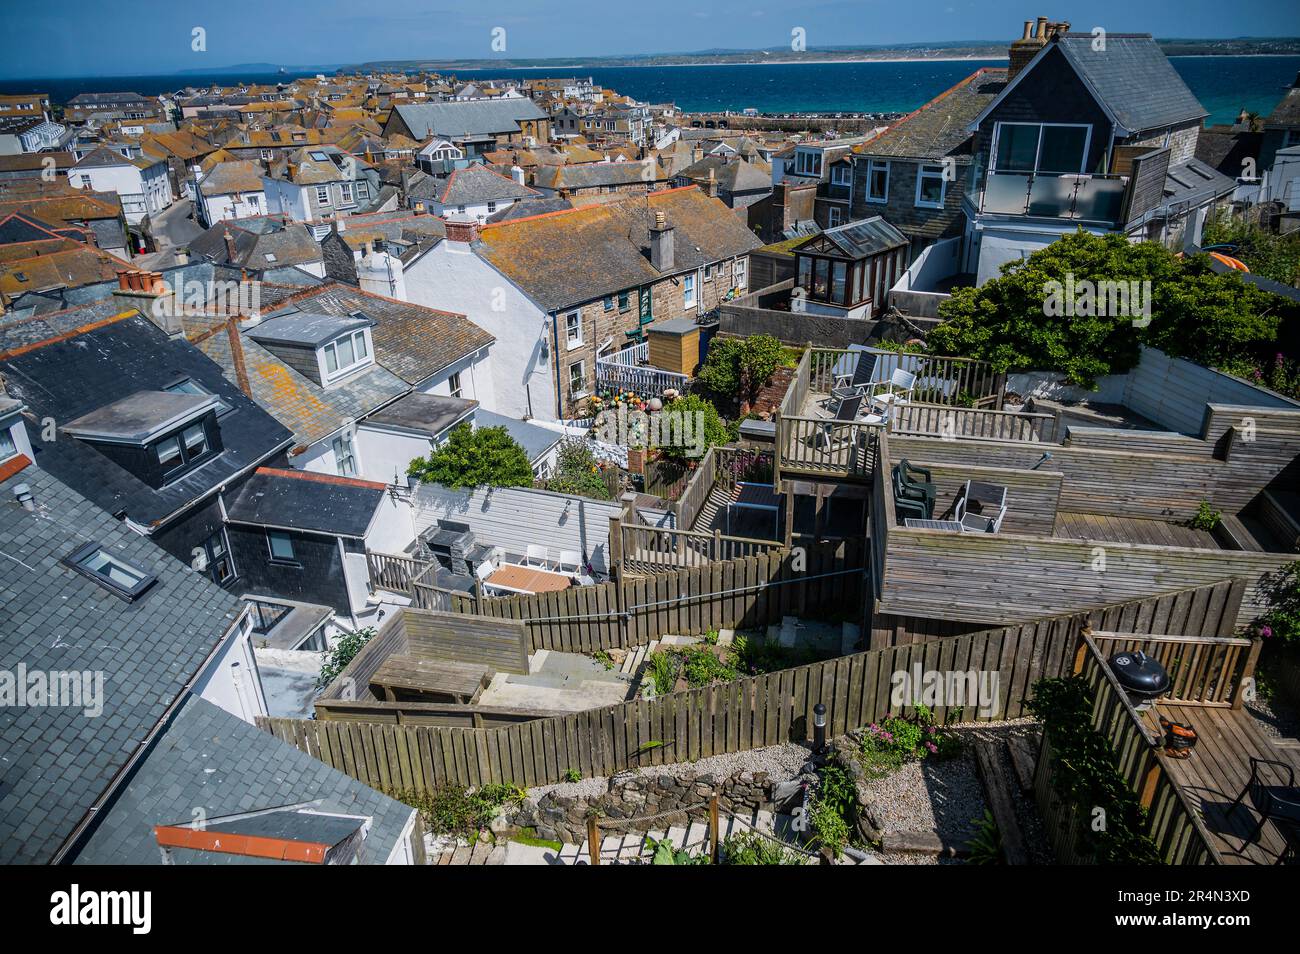 Every bit of space is used by propeerties and their guardens in the crowded town - Sunny weather for the bank holiday weekend in St Ives. Stock Photo